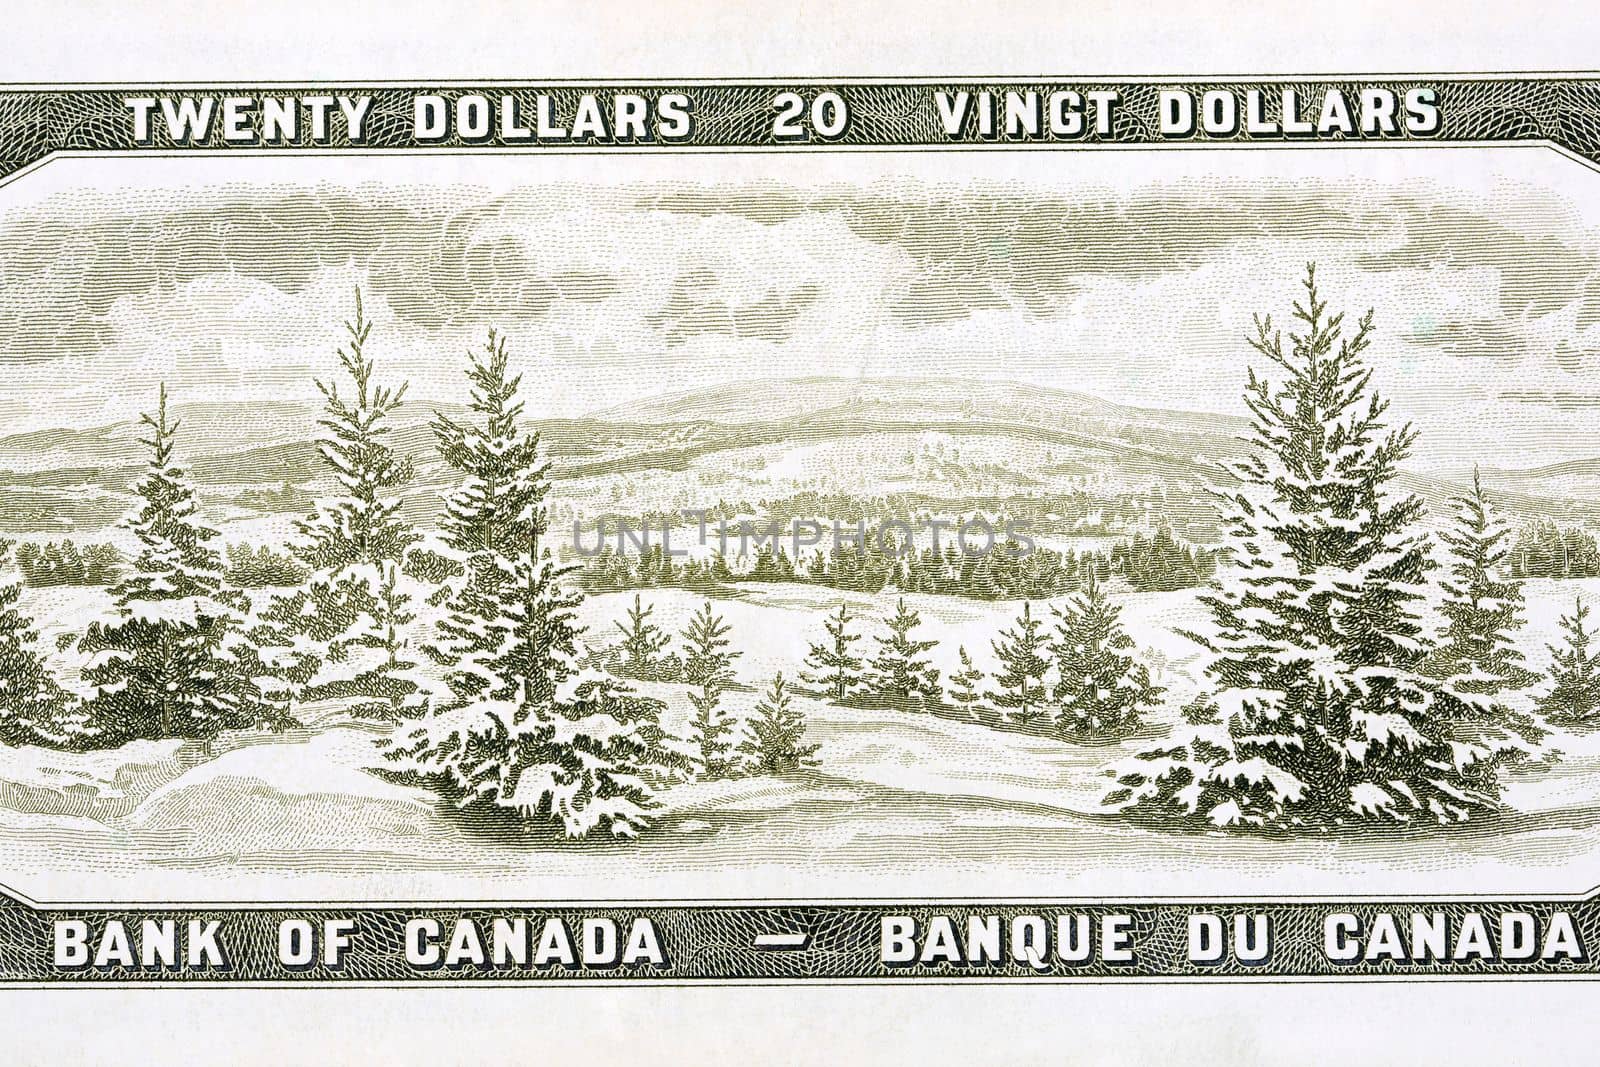 Laurentian hills in winter from old Canadian money by johan10